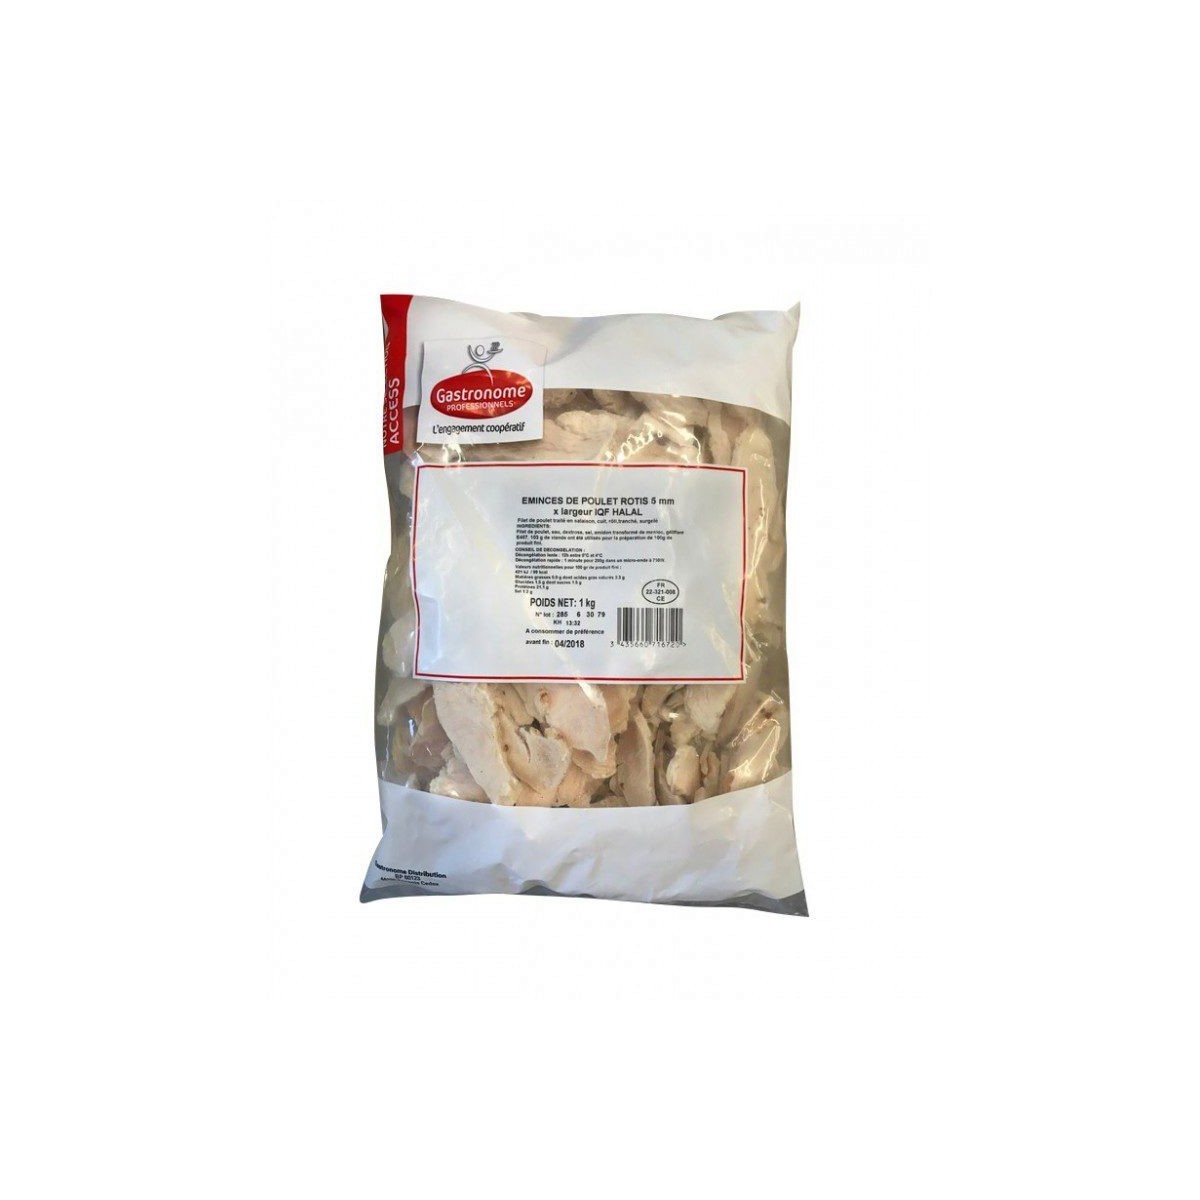 GASTRONOME 571672 ROASTED CHICKEN SLICES 5MM IQF 4X1KG  BAG